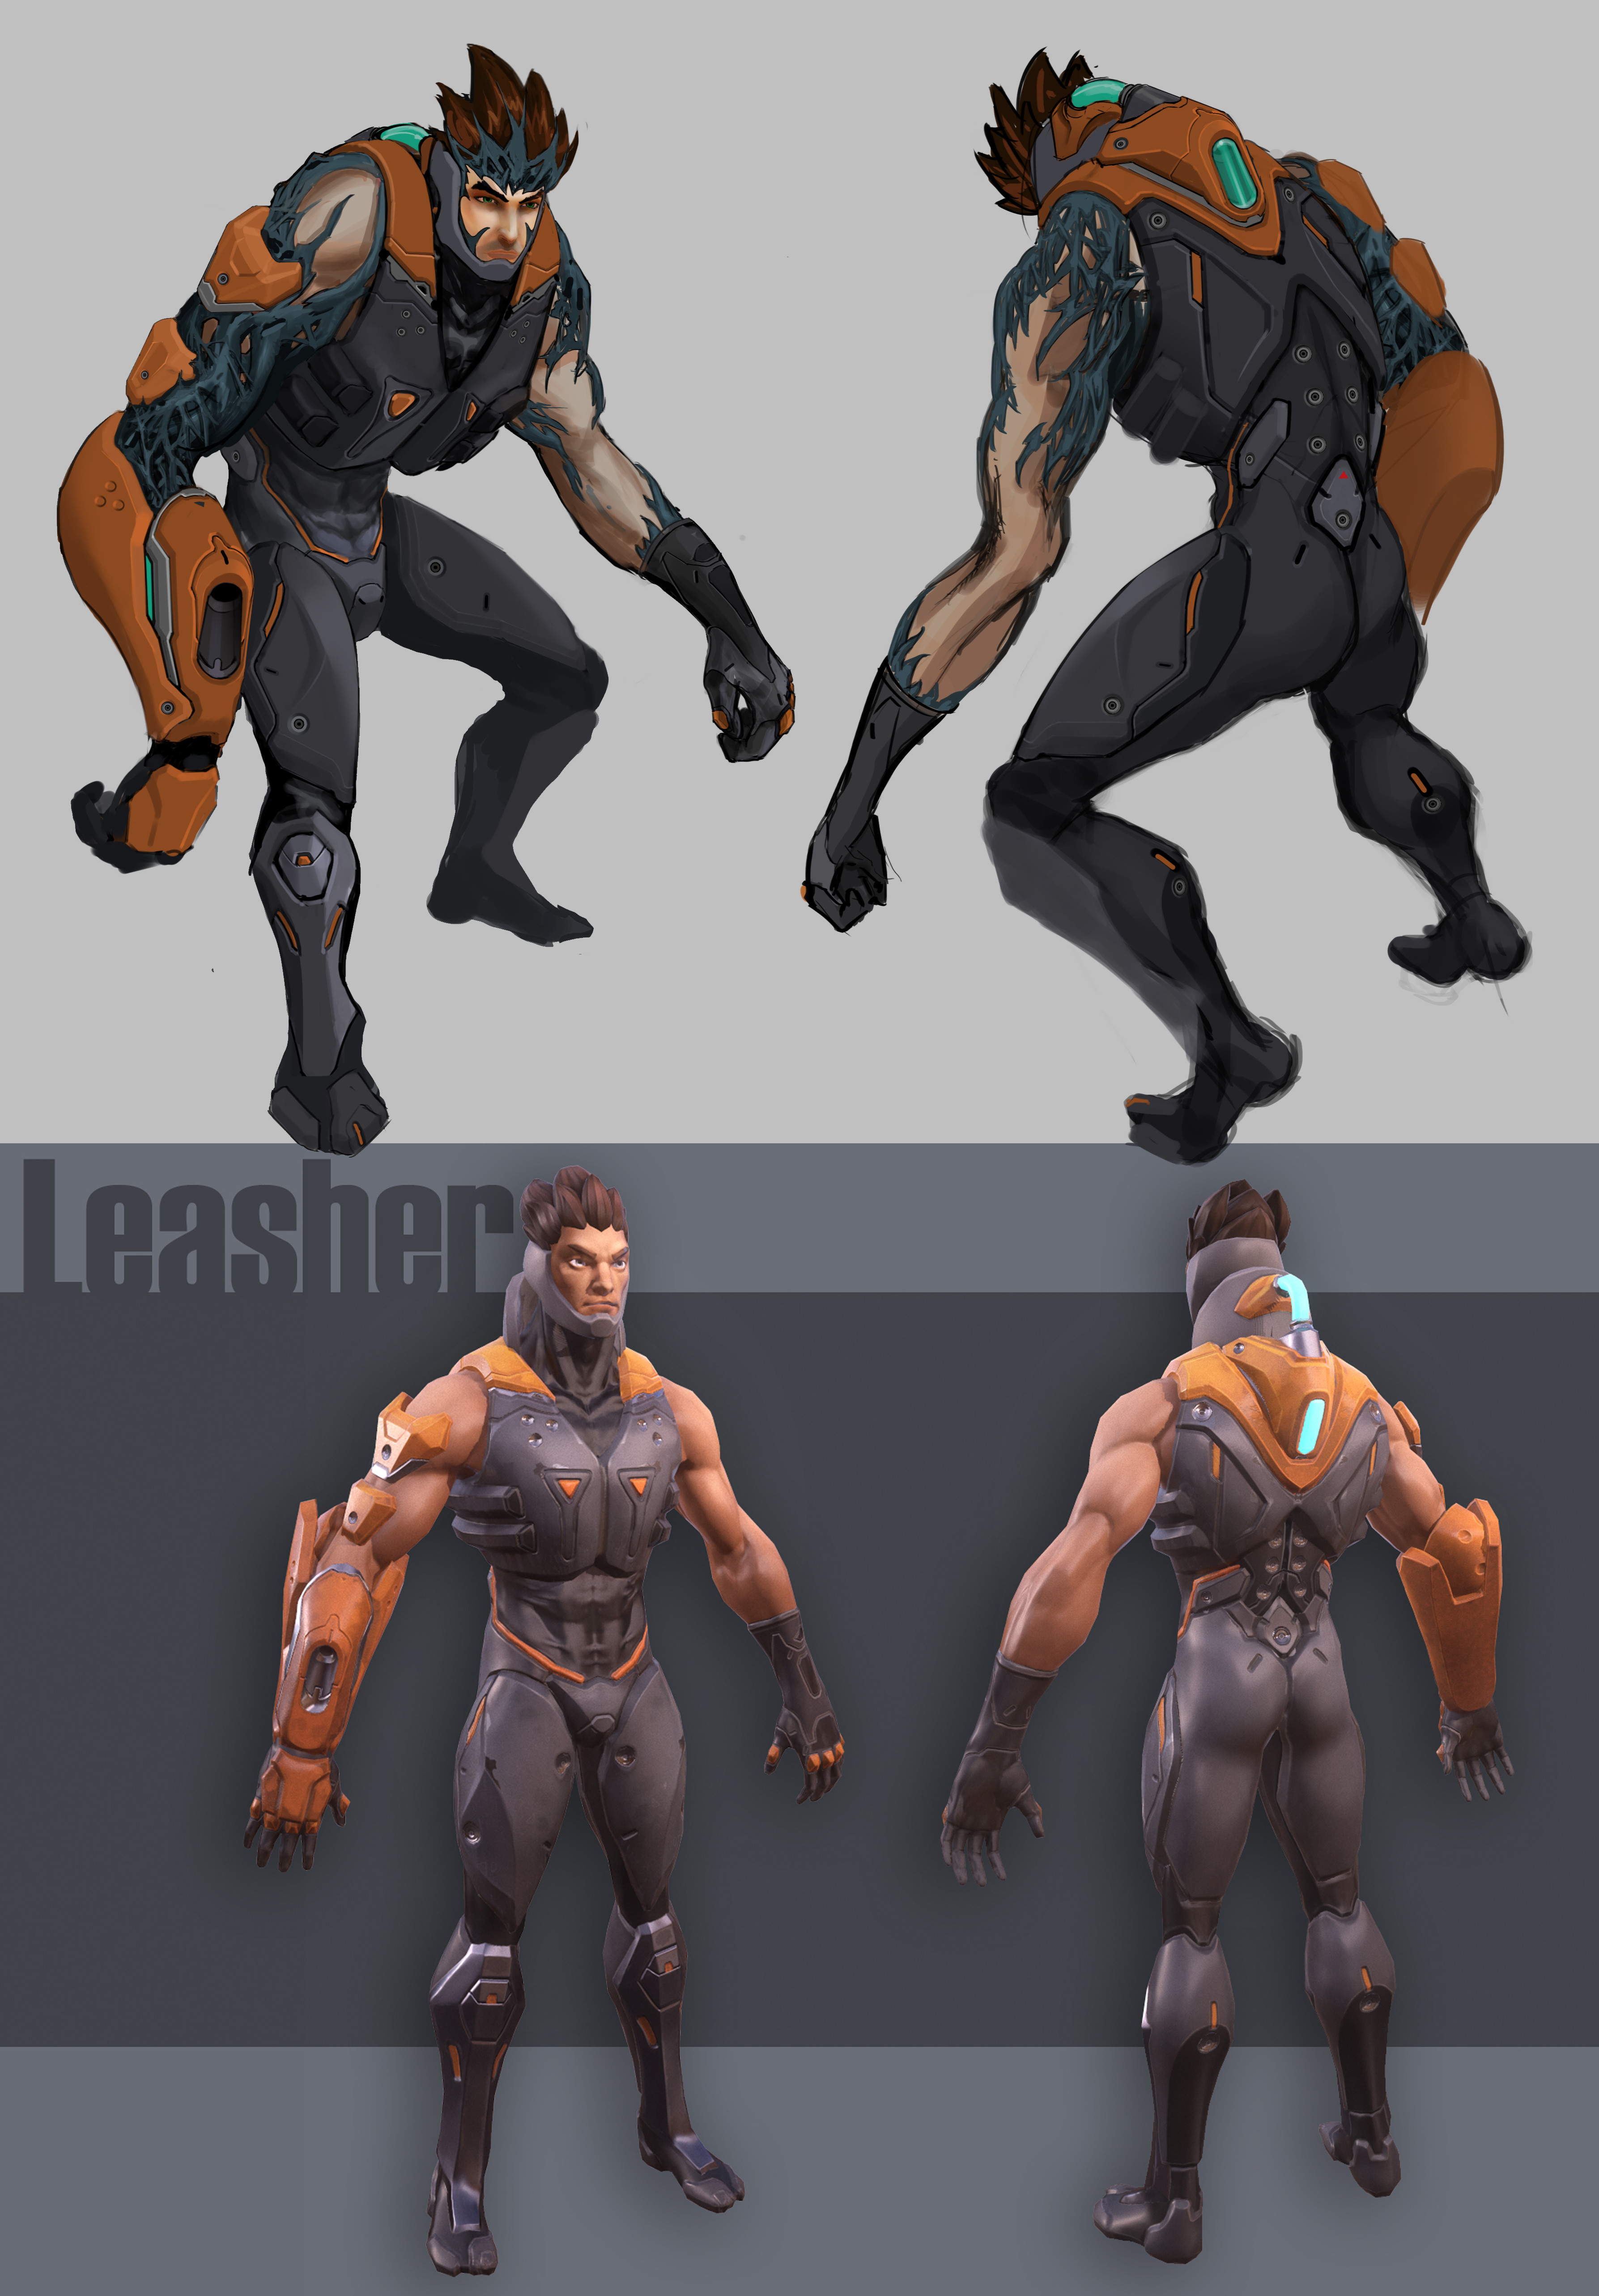 “Leasher” character is designed to have long arms to accentuate its whip lashing motion from the giant whip embedded in his arm